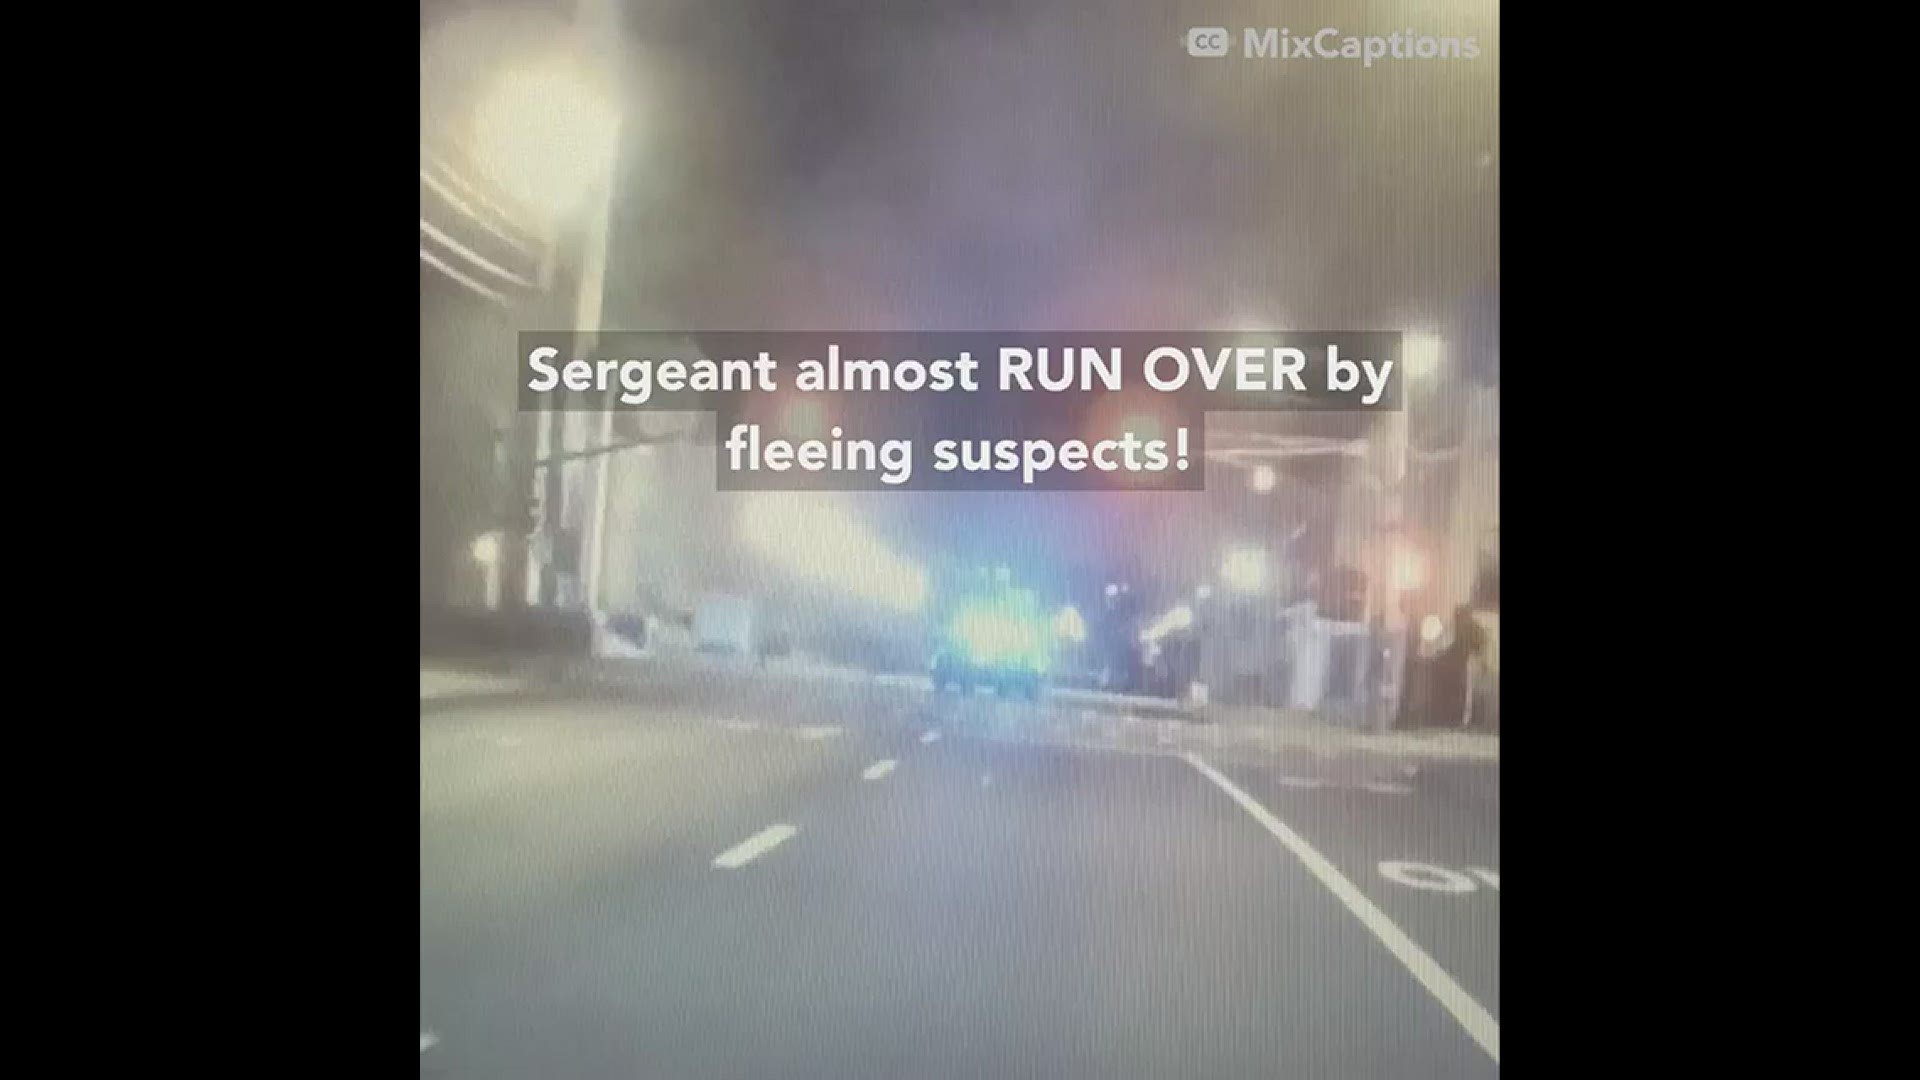 The incident was captured on a dashcam.